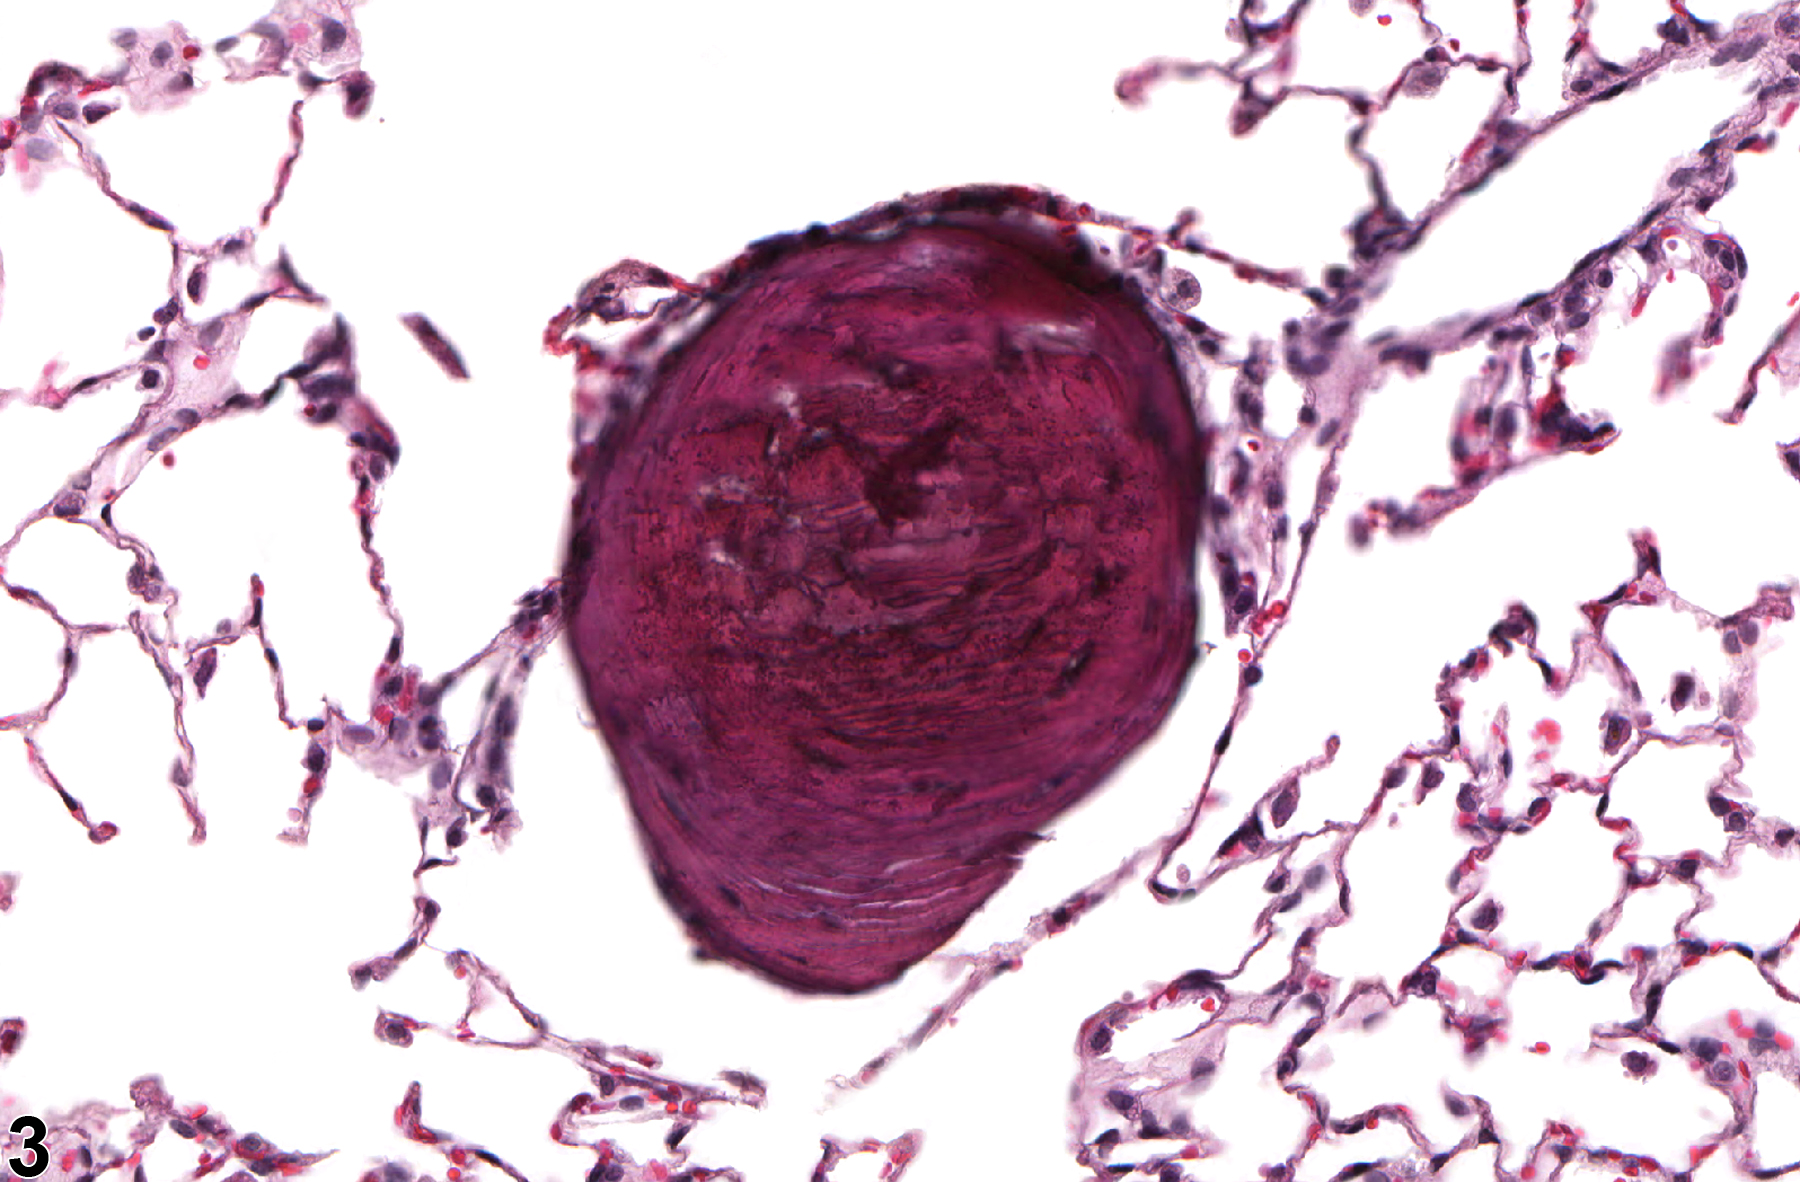 Image of osseous metaplasia in the lung from a male F344/N rat in a chronic study